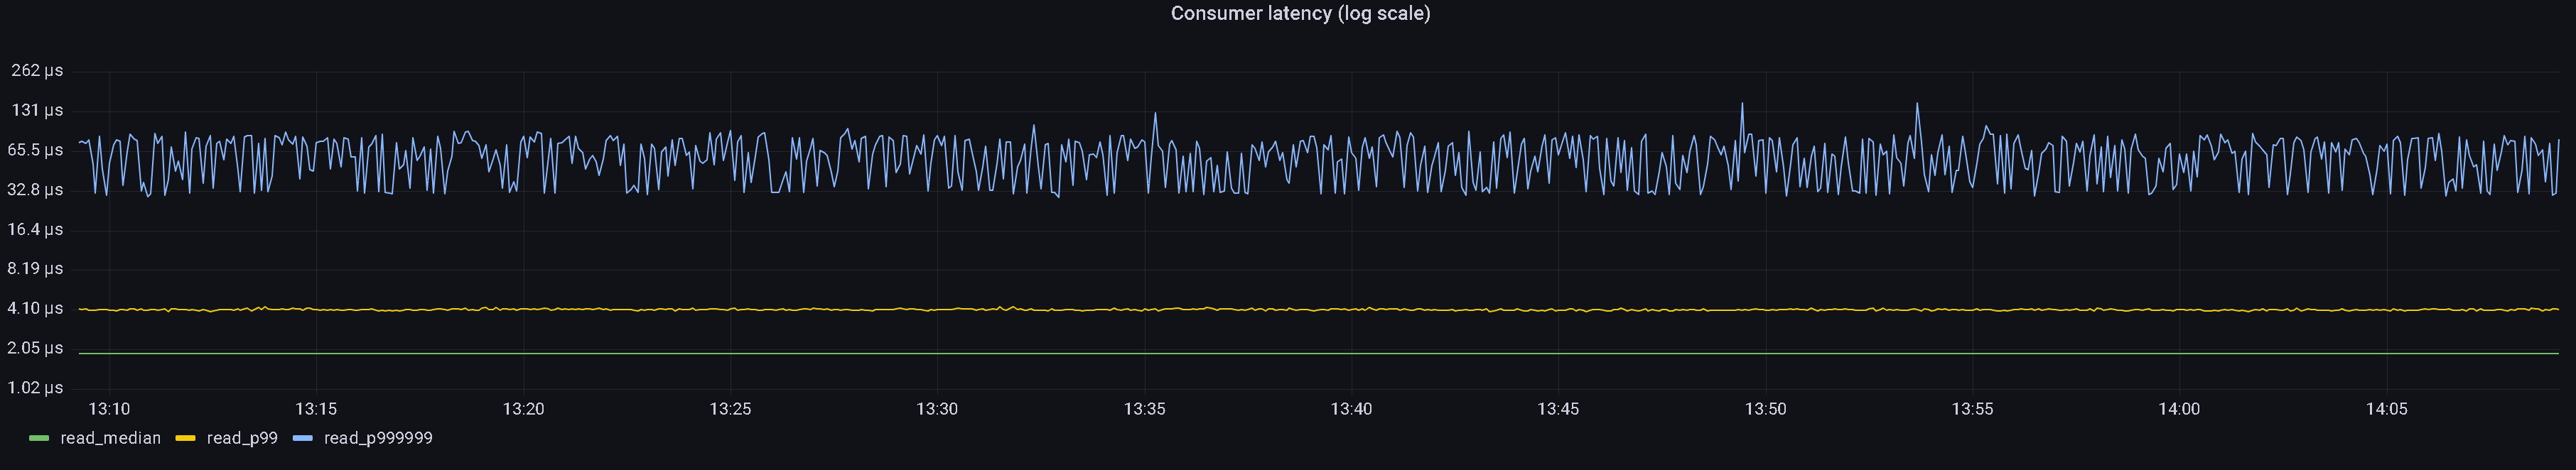 topic latency over 1-hour